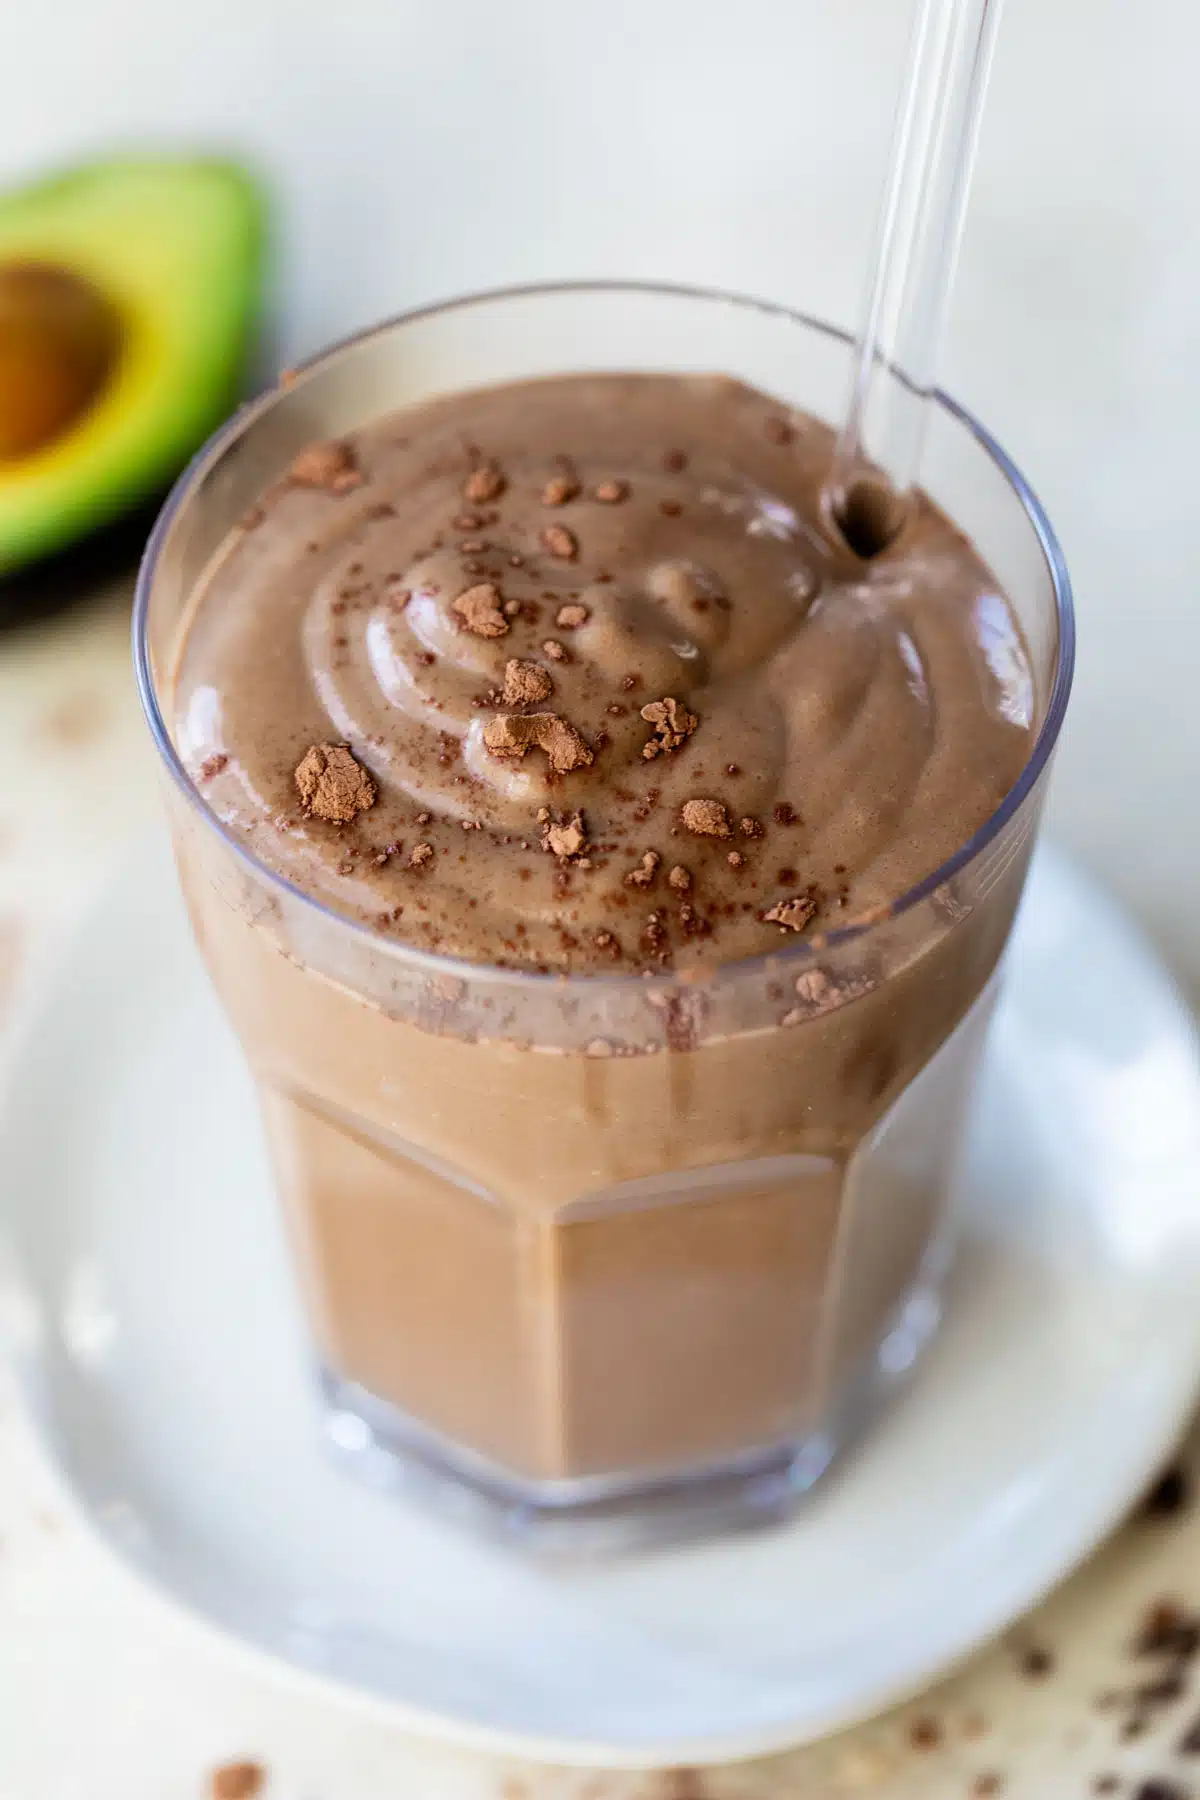 chocolate smoothie in a glass with a straw beside an avocado